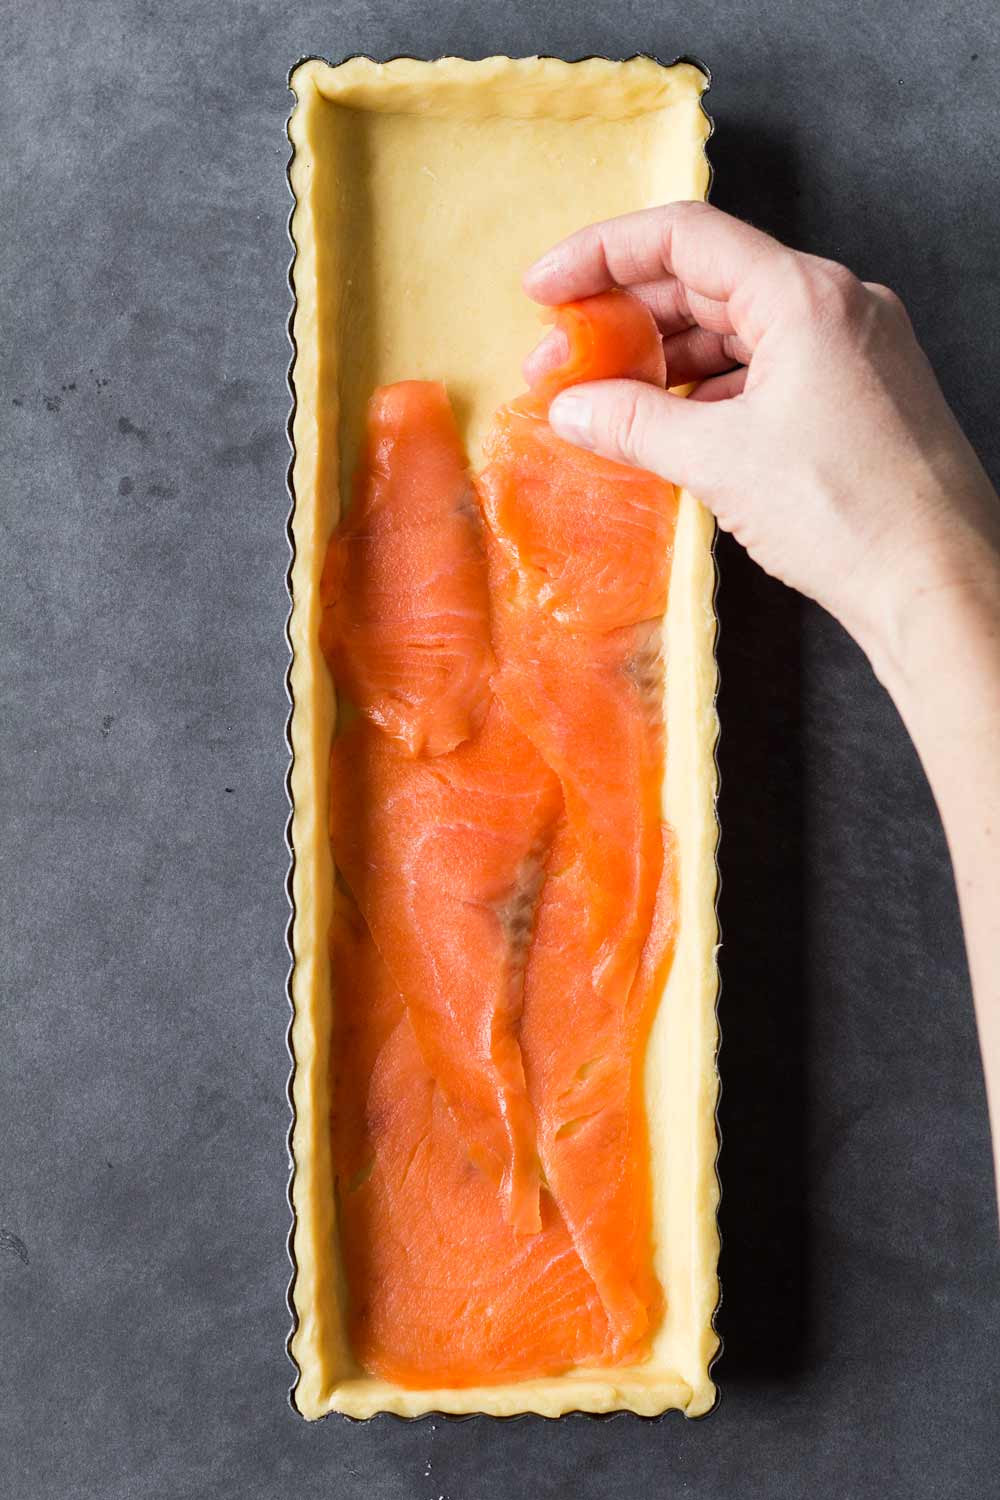 placing slices of smoked salmon into a puff pastry crust